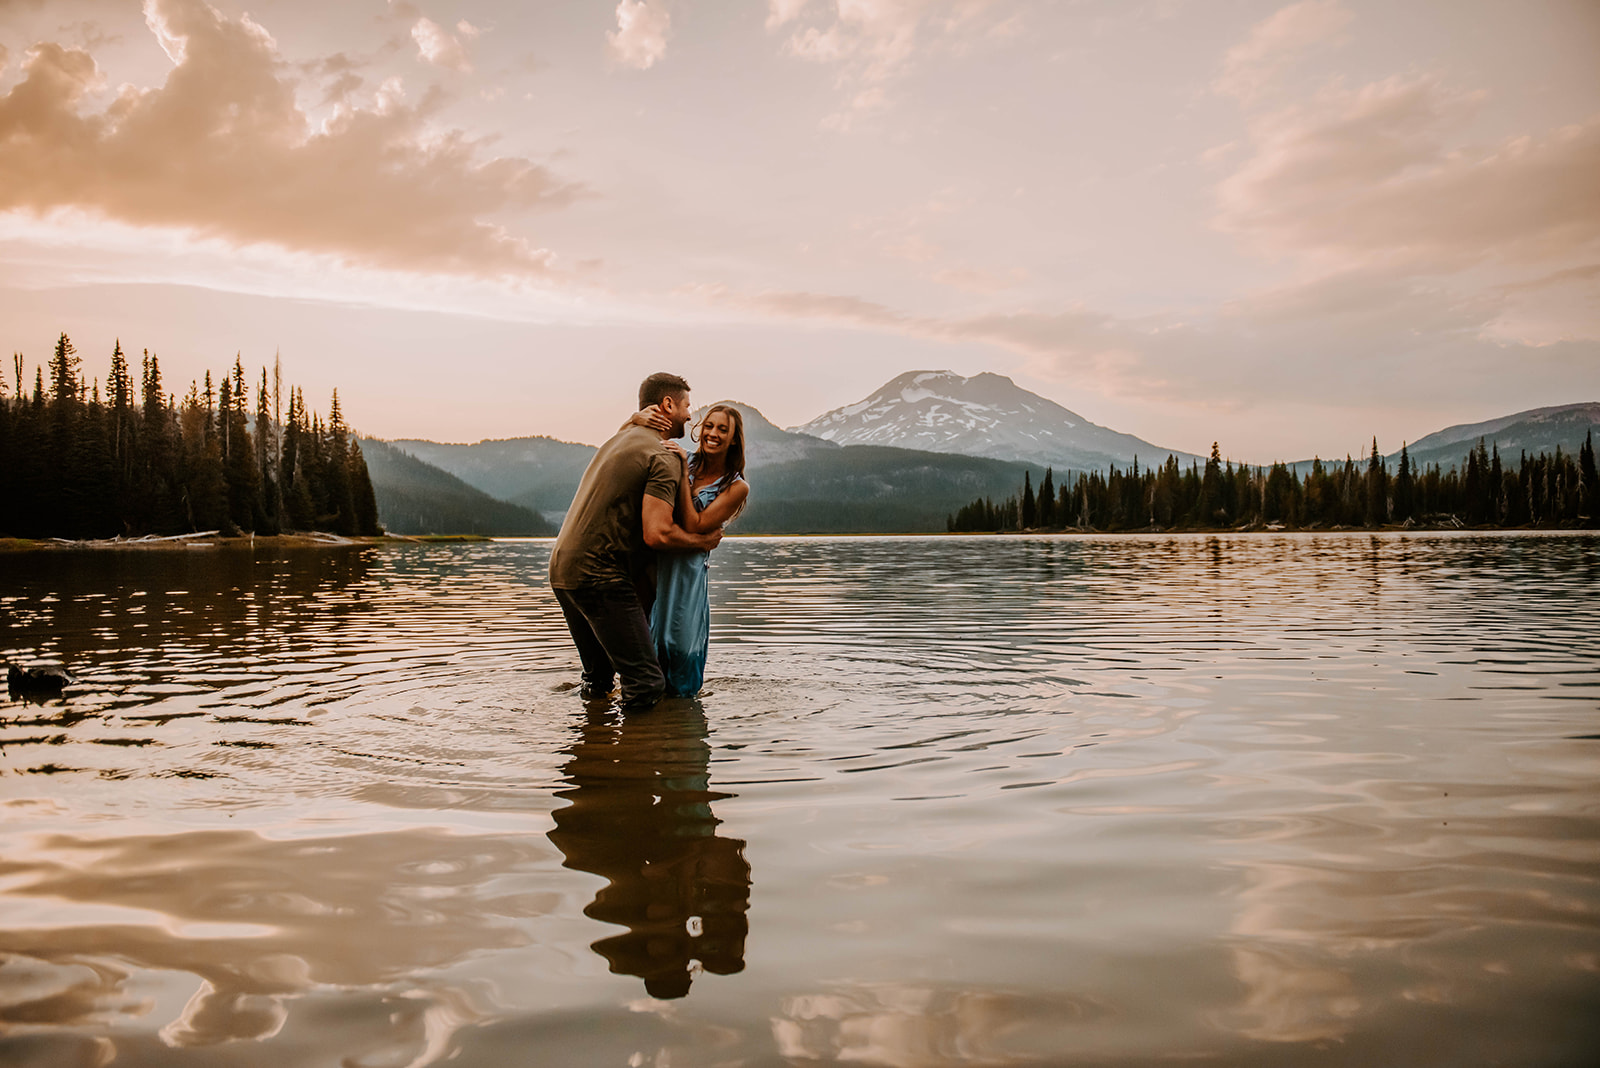 A couple playing in the water and kissing in front of the mountain at sunset